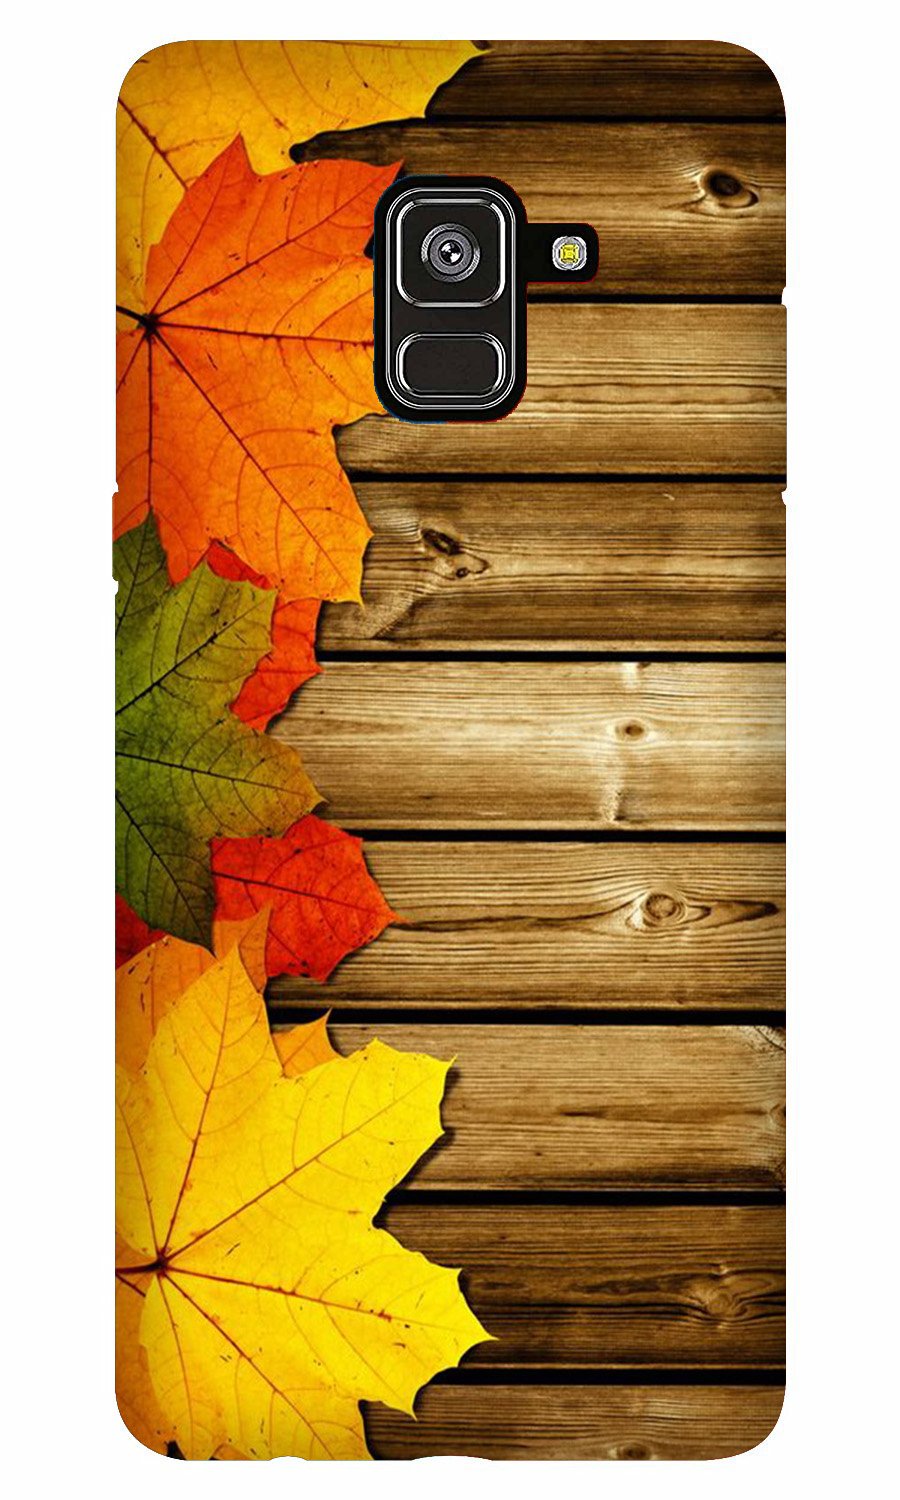 Wooden look3 Case for Galaxy A8 Plus